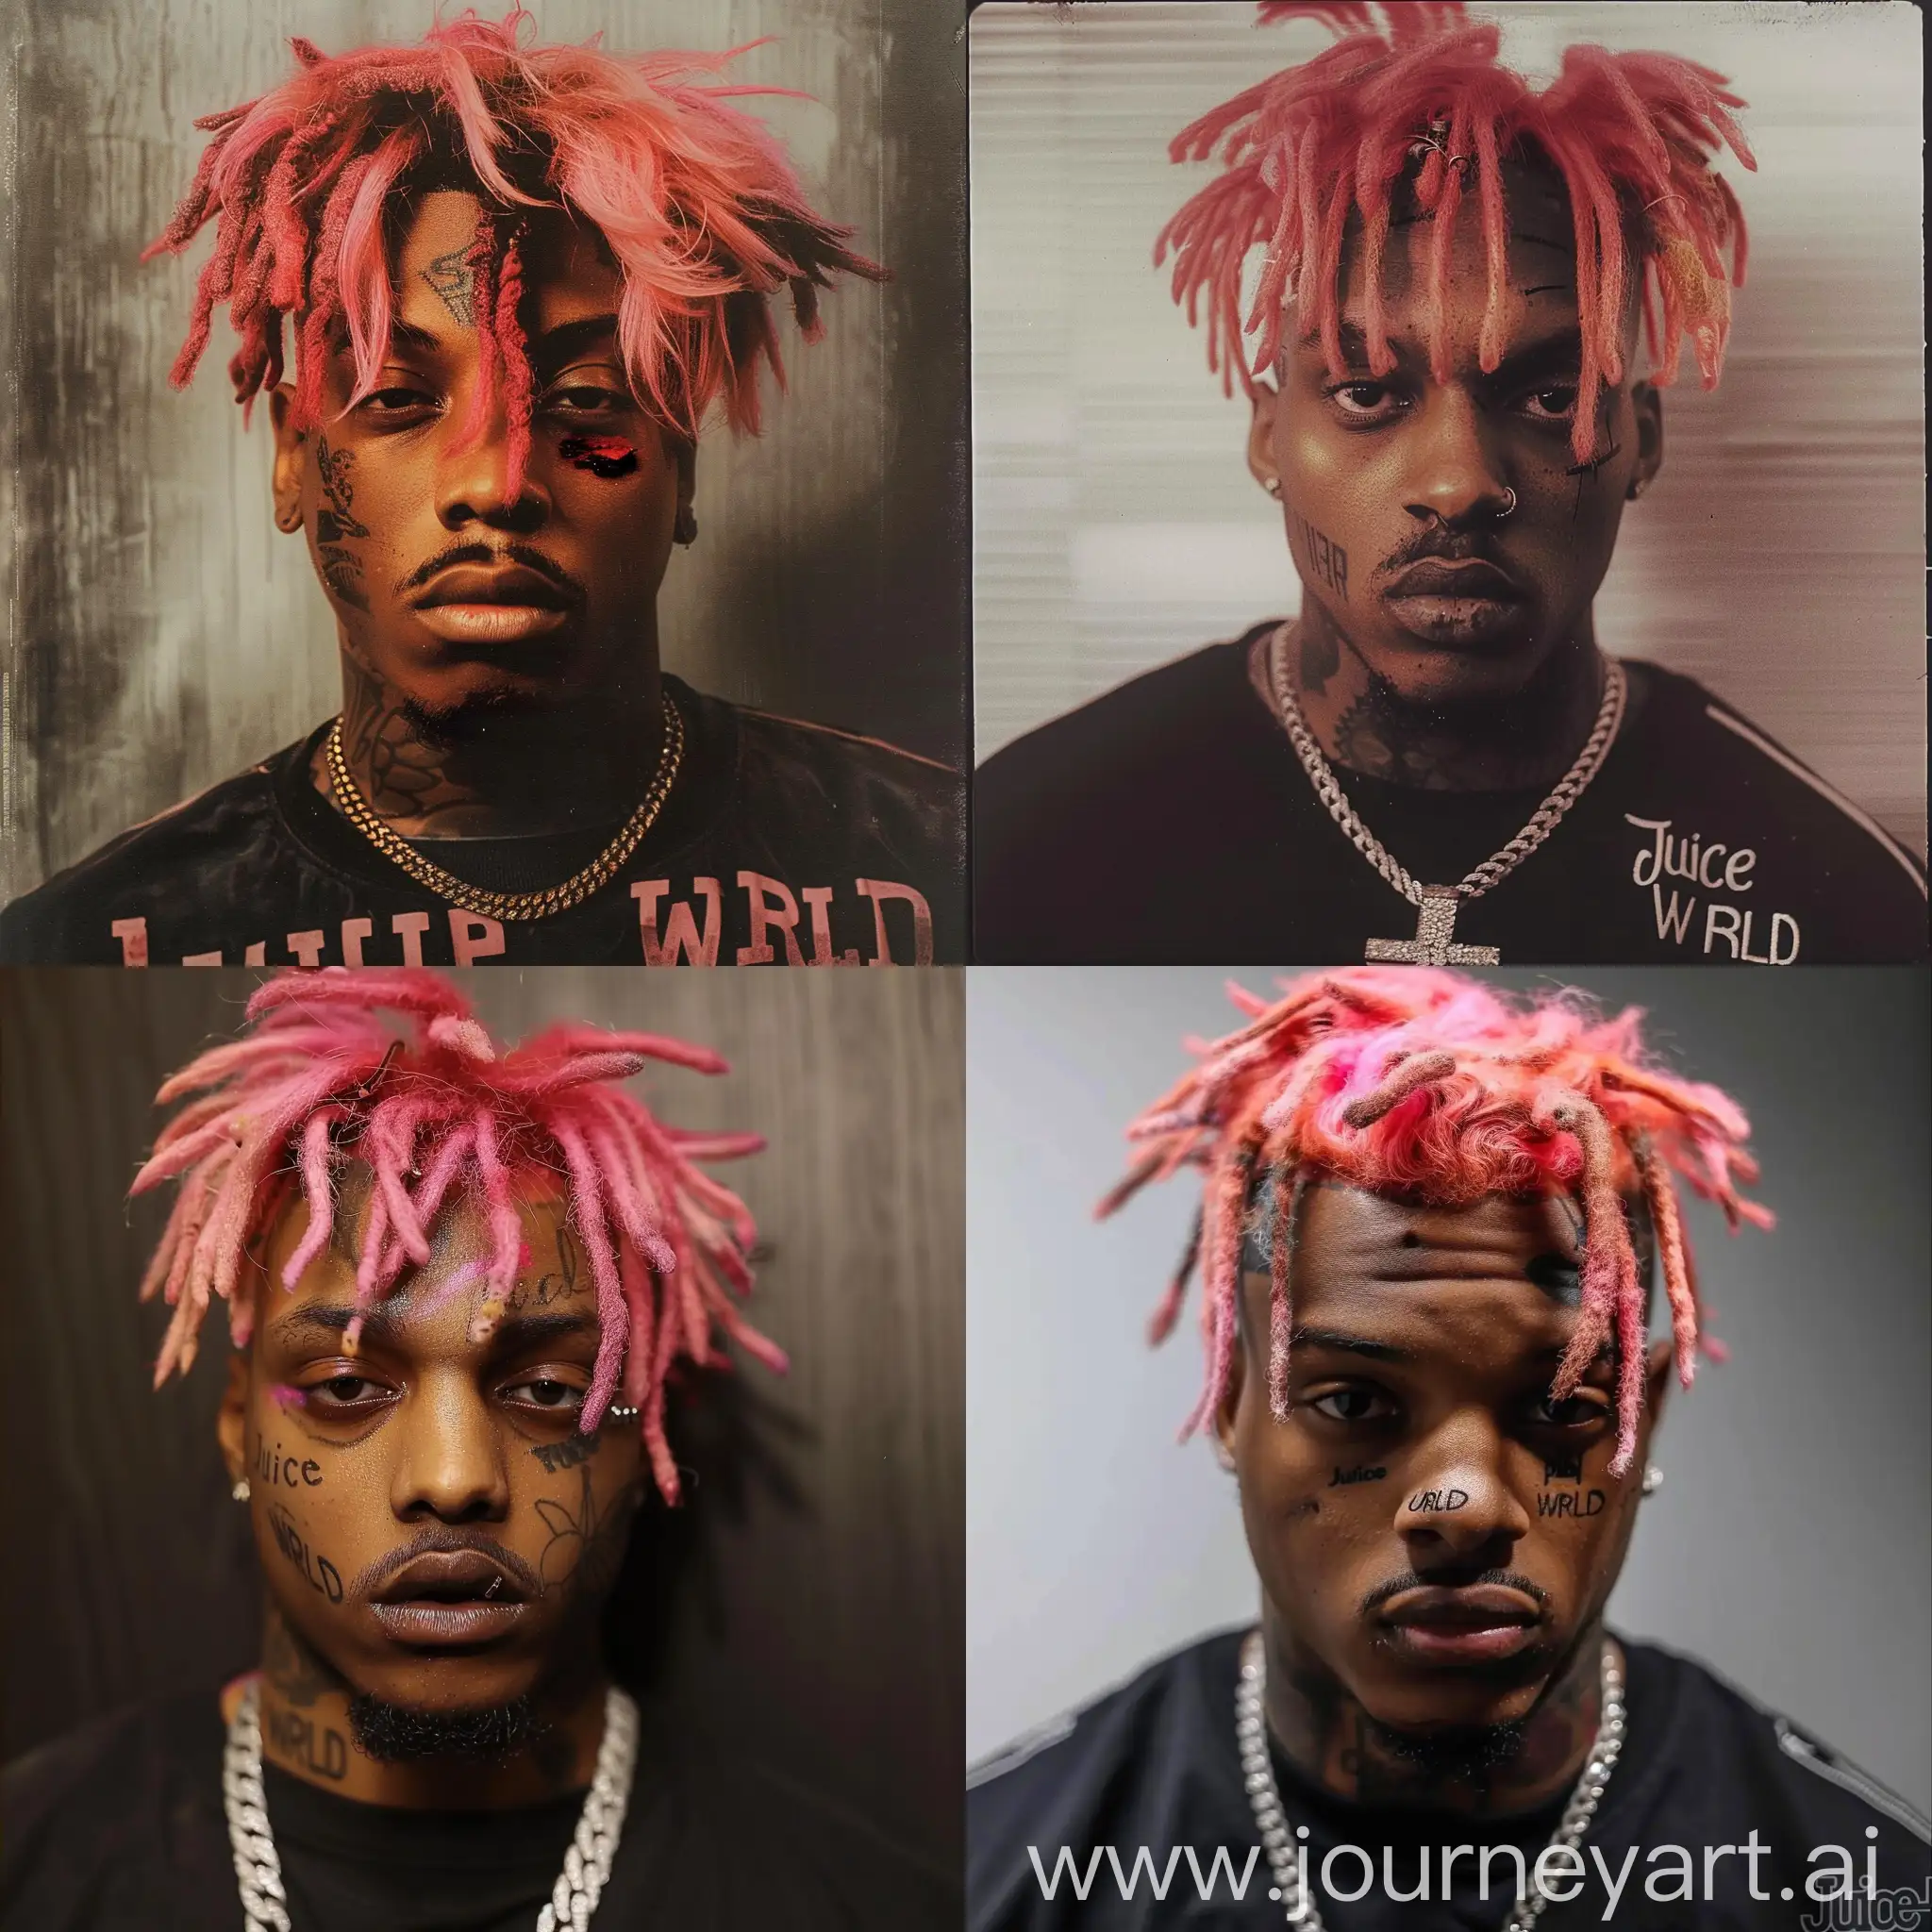 A Mugshot of “Juice WRLD” with pink hair,and a bruised eye